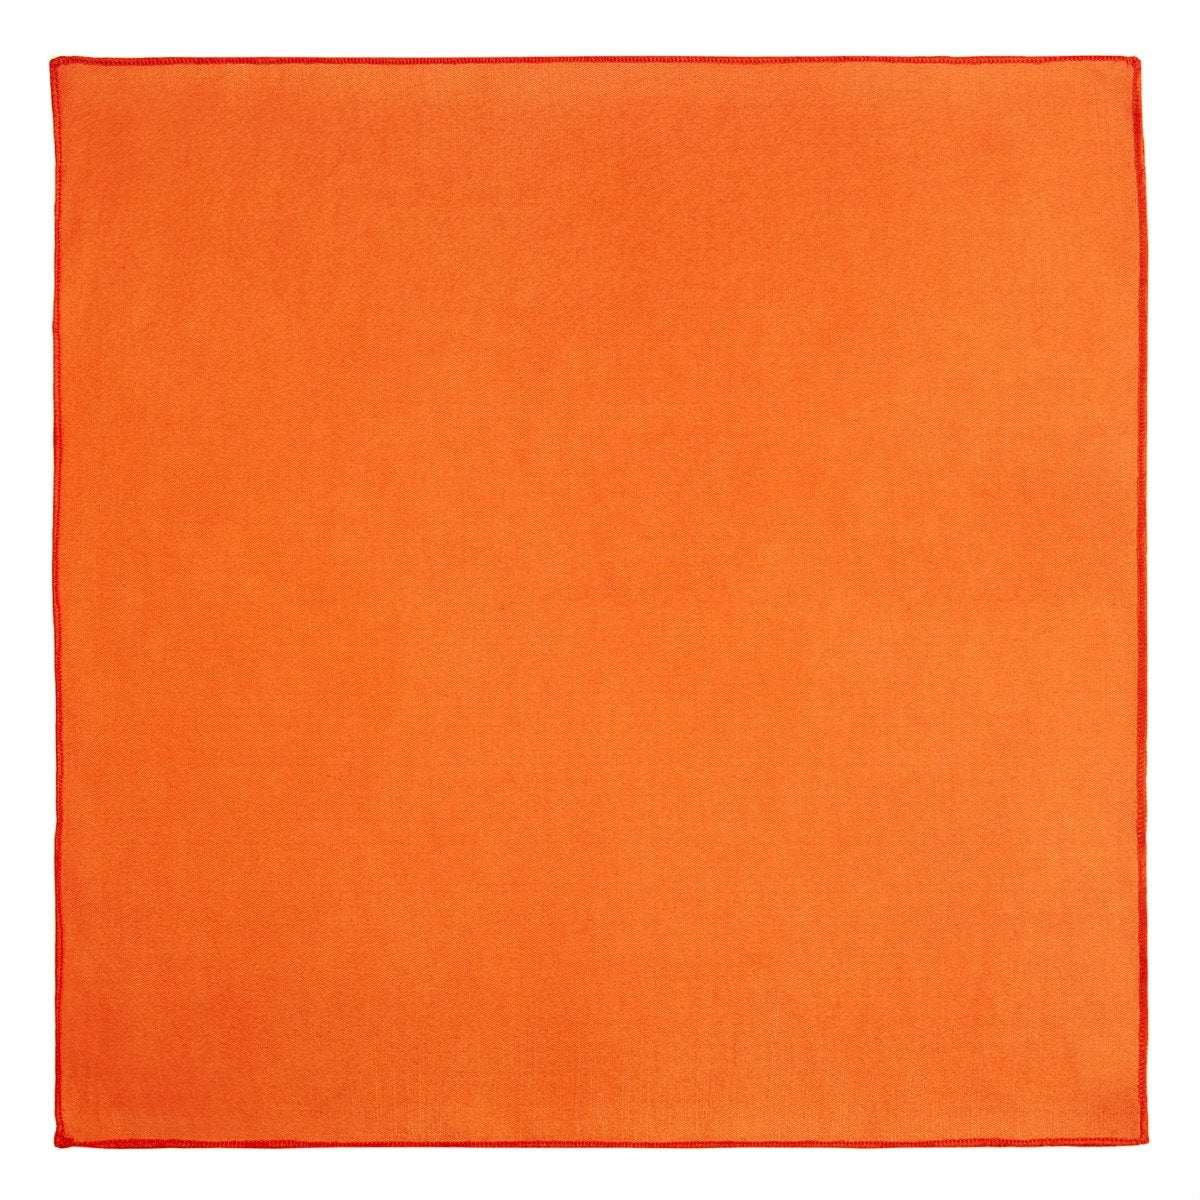 Chokore Flame Colour Pure Silk Pocket Square, from the Solids Line